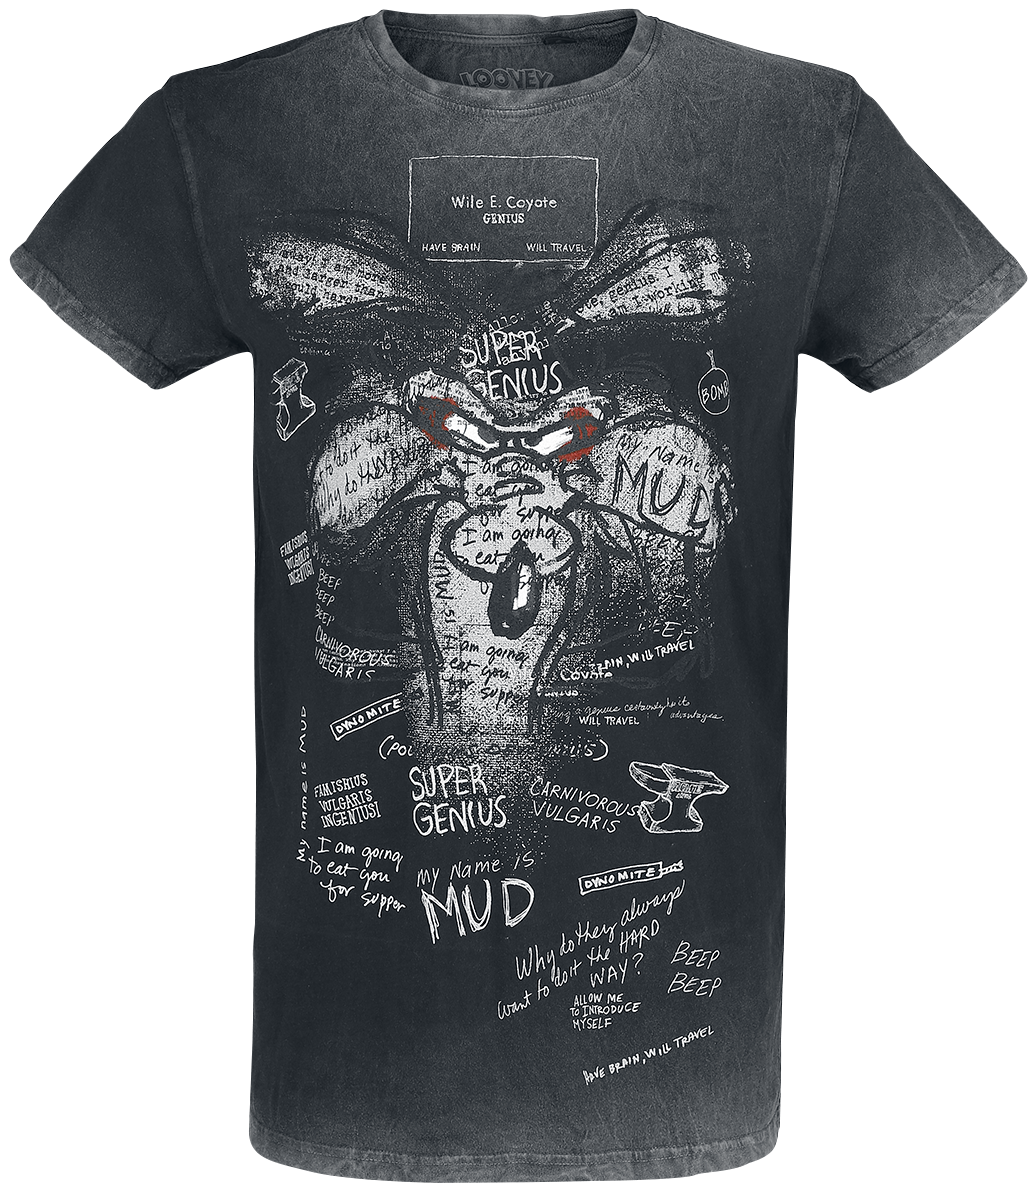 Looney Tunes - Wile E. Coyote - Inner Thoughts - T-Shirt - schwarz - EMP Exklusiv!